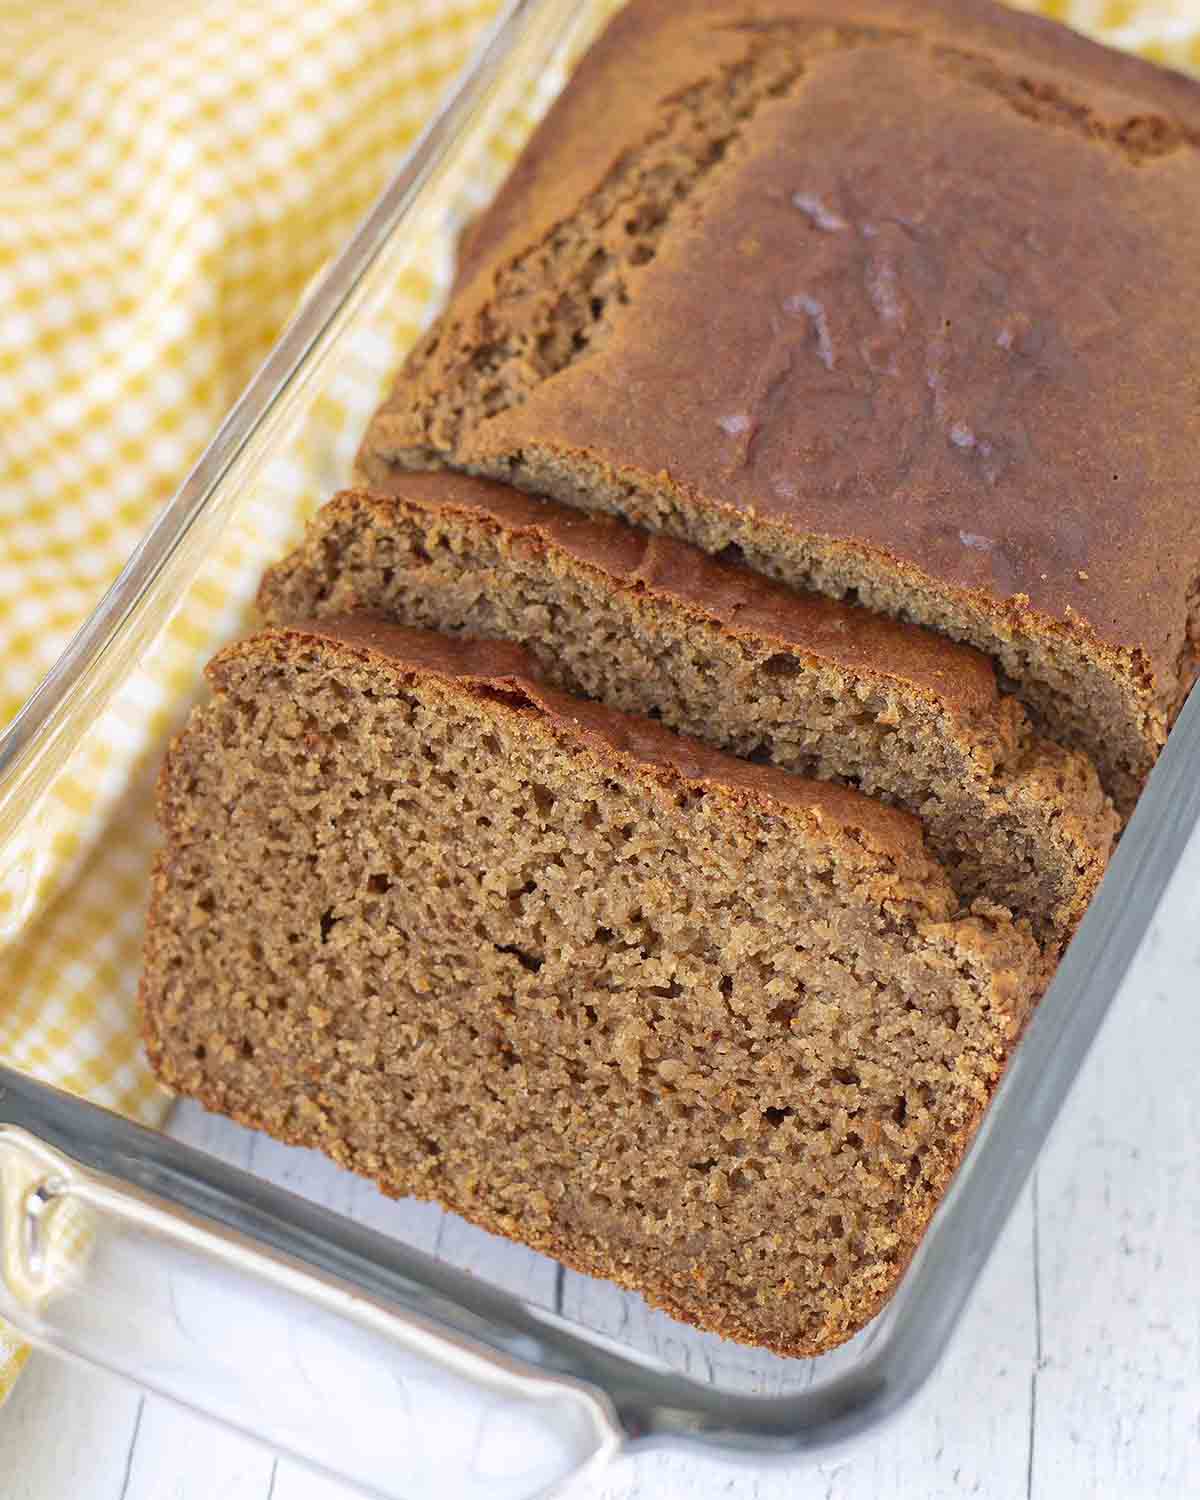 Freshly baked gluten free banana bread in a glass baking dish, there are two sliced pieces at the front of the loaf.